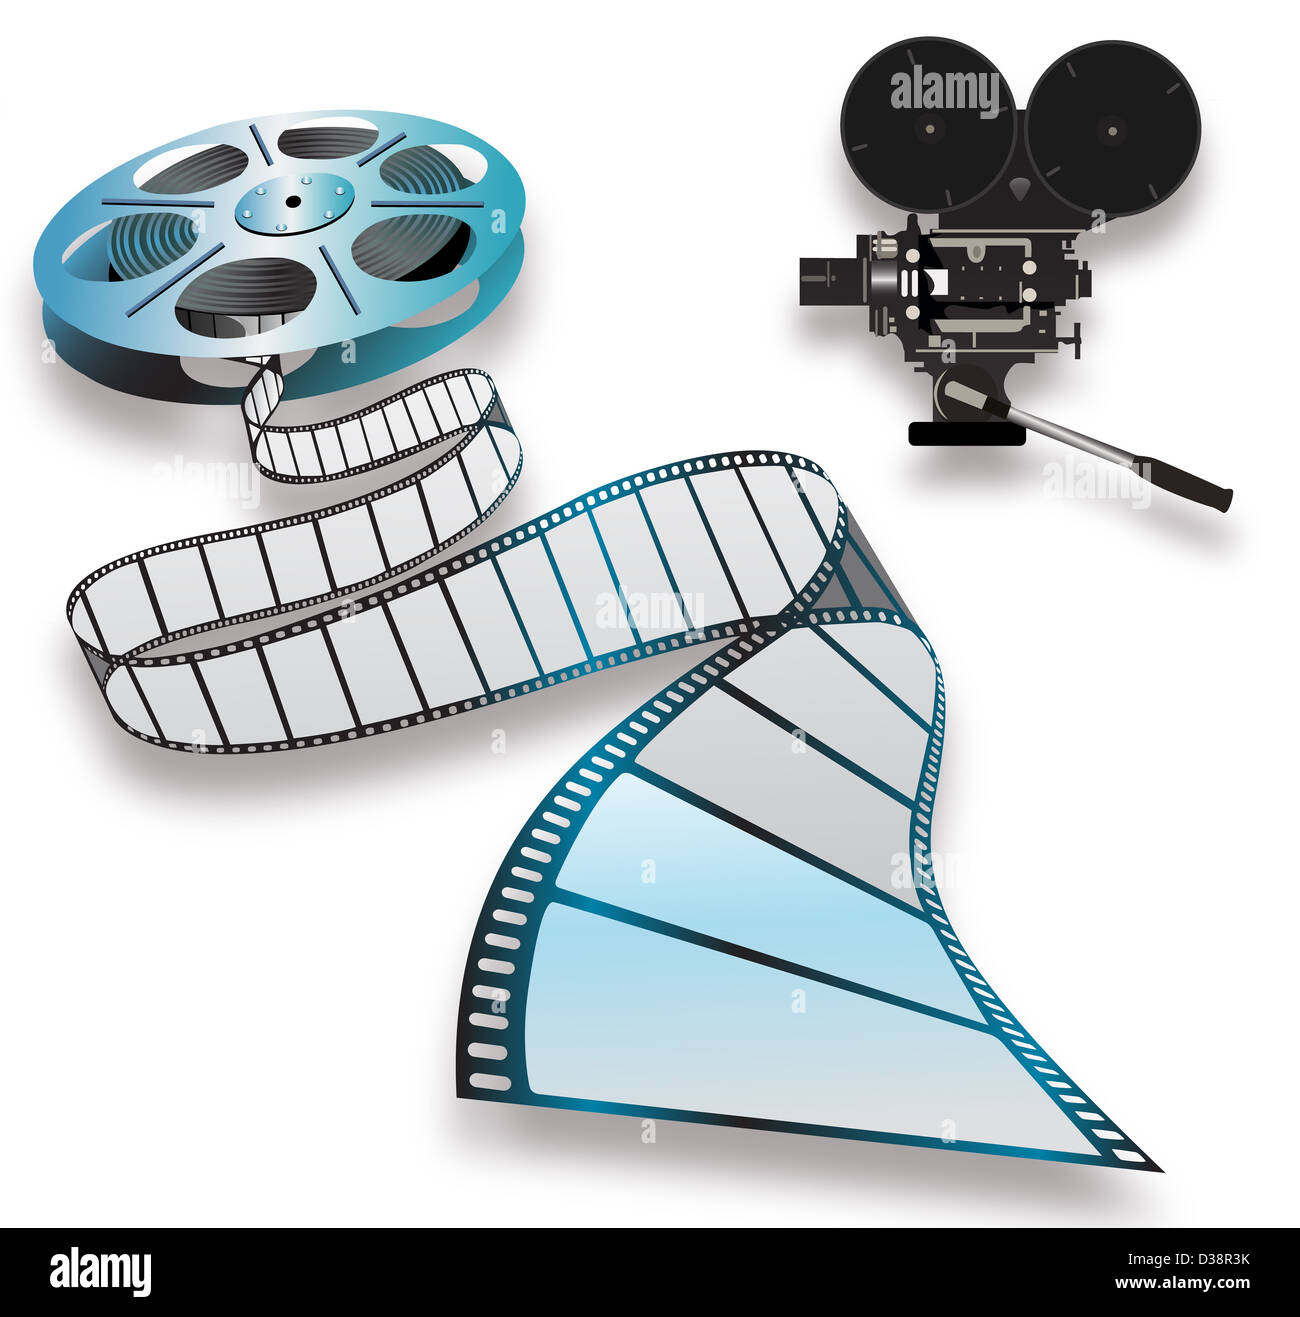 Circle reel Cut Out Stock Images & Pictures - Alamy